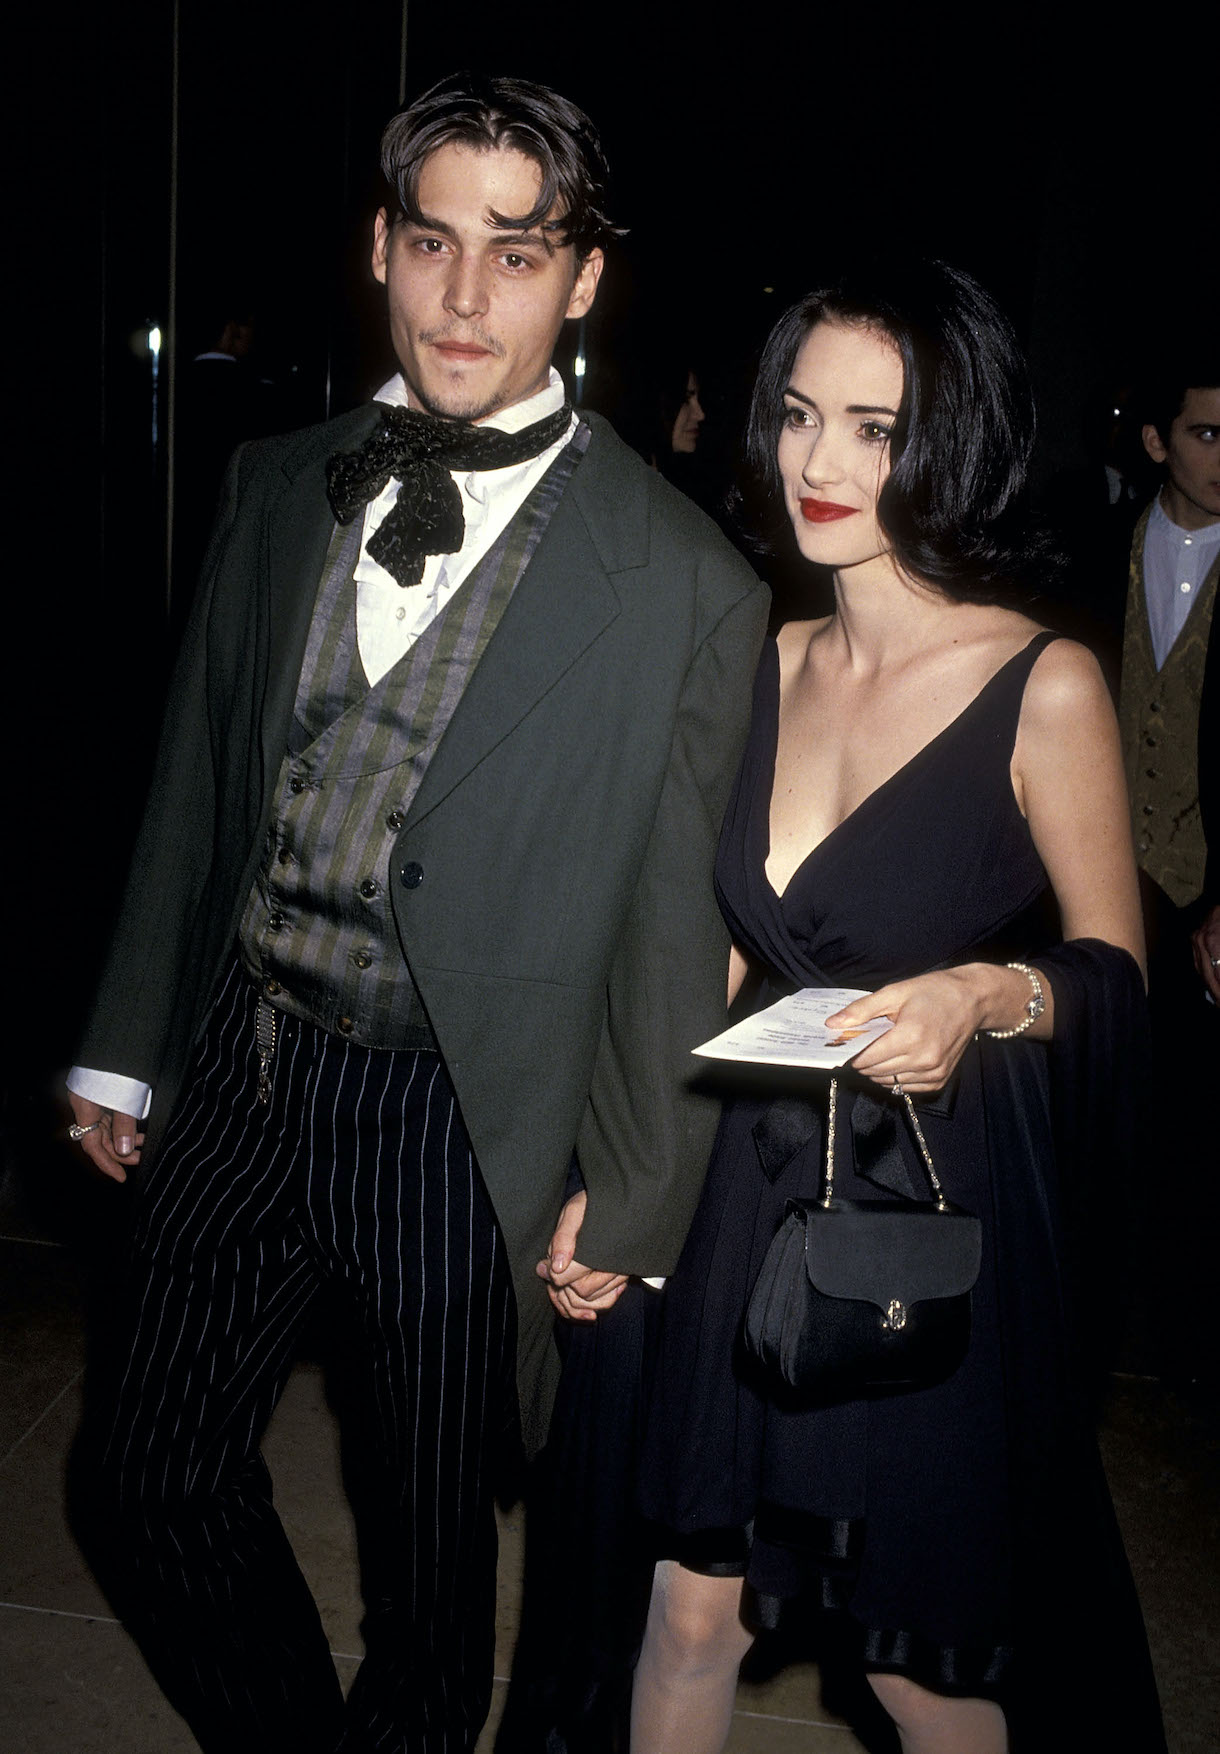 Actor Johnny Depp and actress Winona Ryder attend the 48th Annual Golden Globe Awards on January 19, 1991